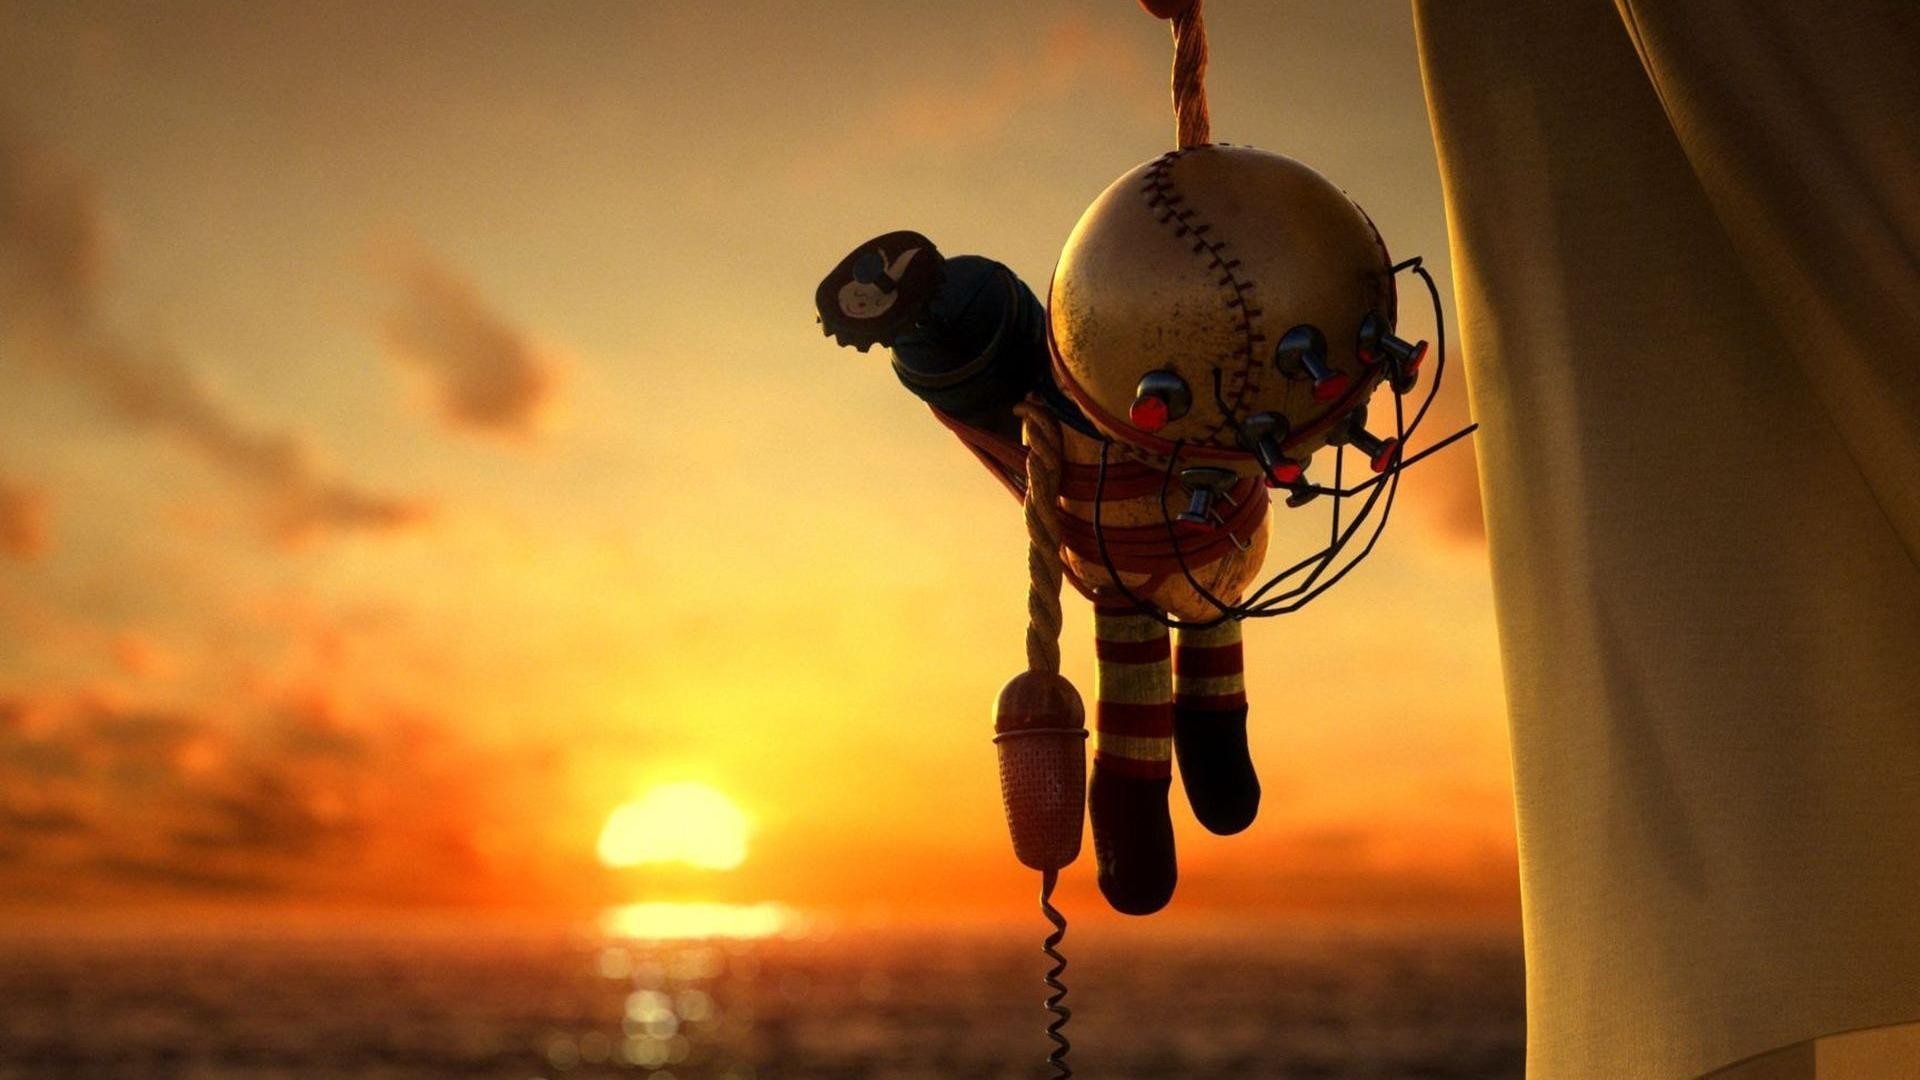 abstract, Toy, Baseball, Sunset, Sea, Unravel Wallpaper